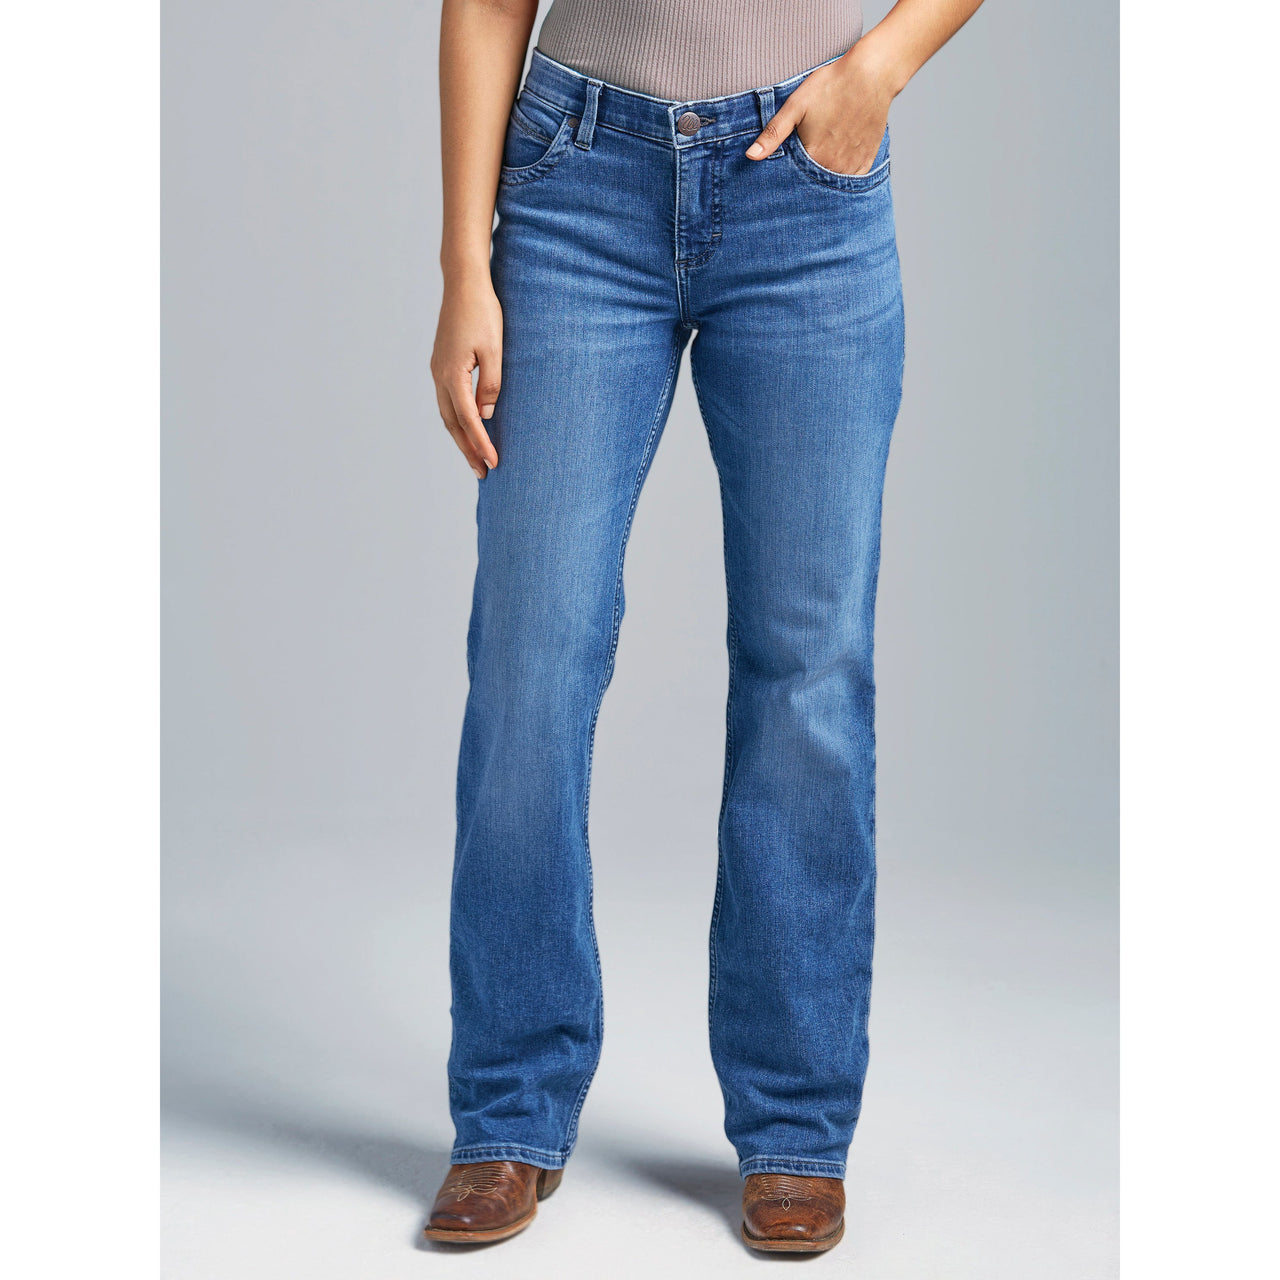 Wrangler Women's Ultimate Riding Q-Baby Bootcut Jeans - Maddie